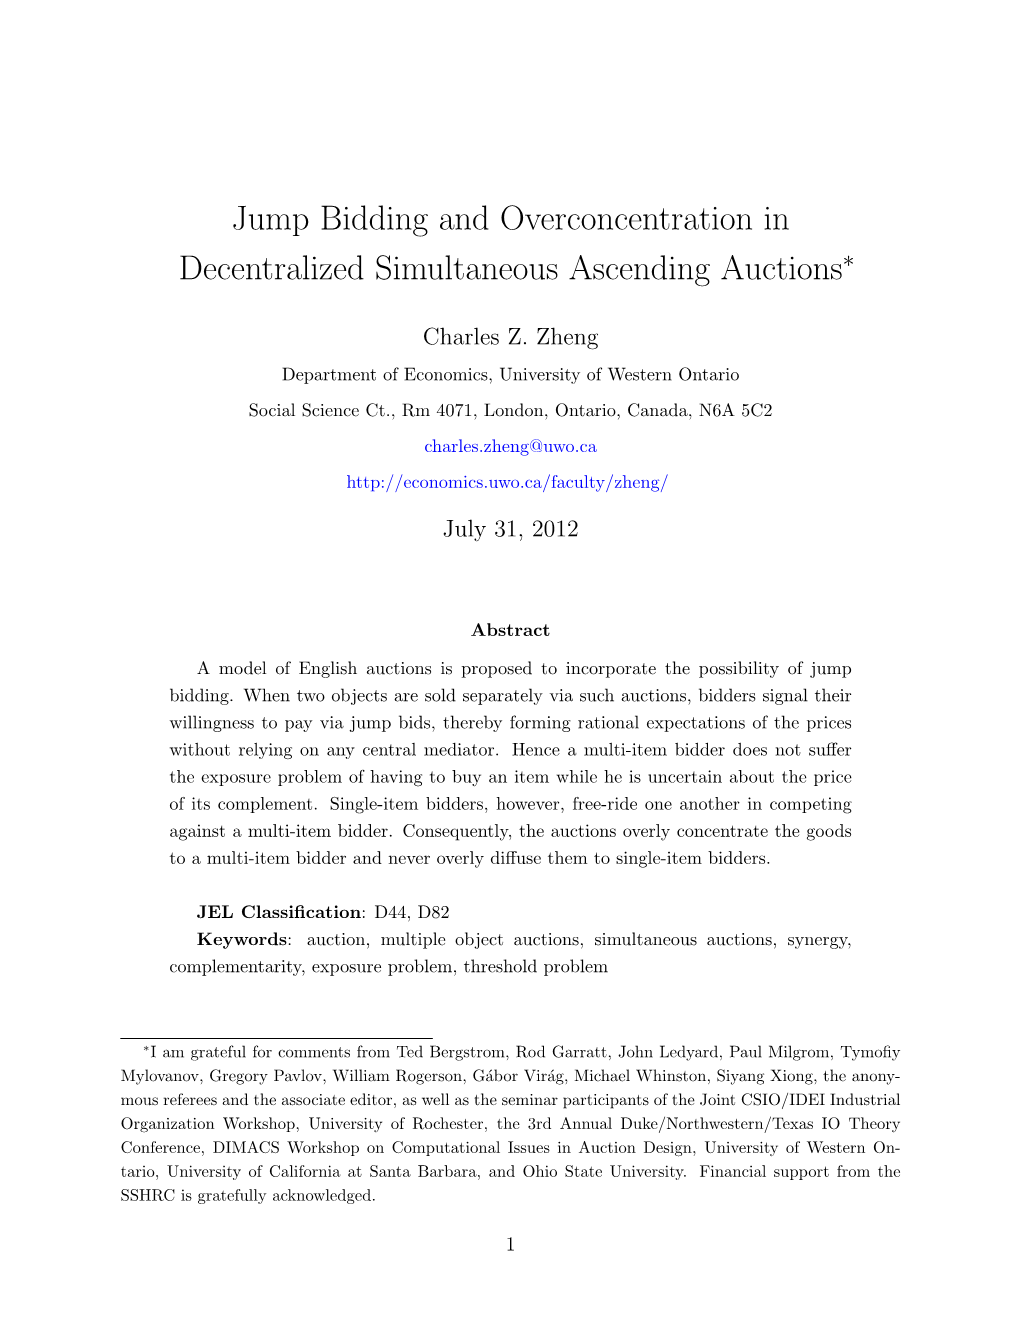 Jump Bidding and Overconcentration in Decentralized Simultaneous Ascending Auctions∗